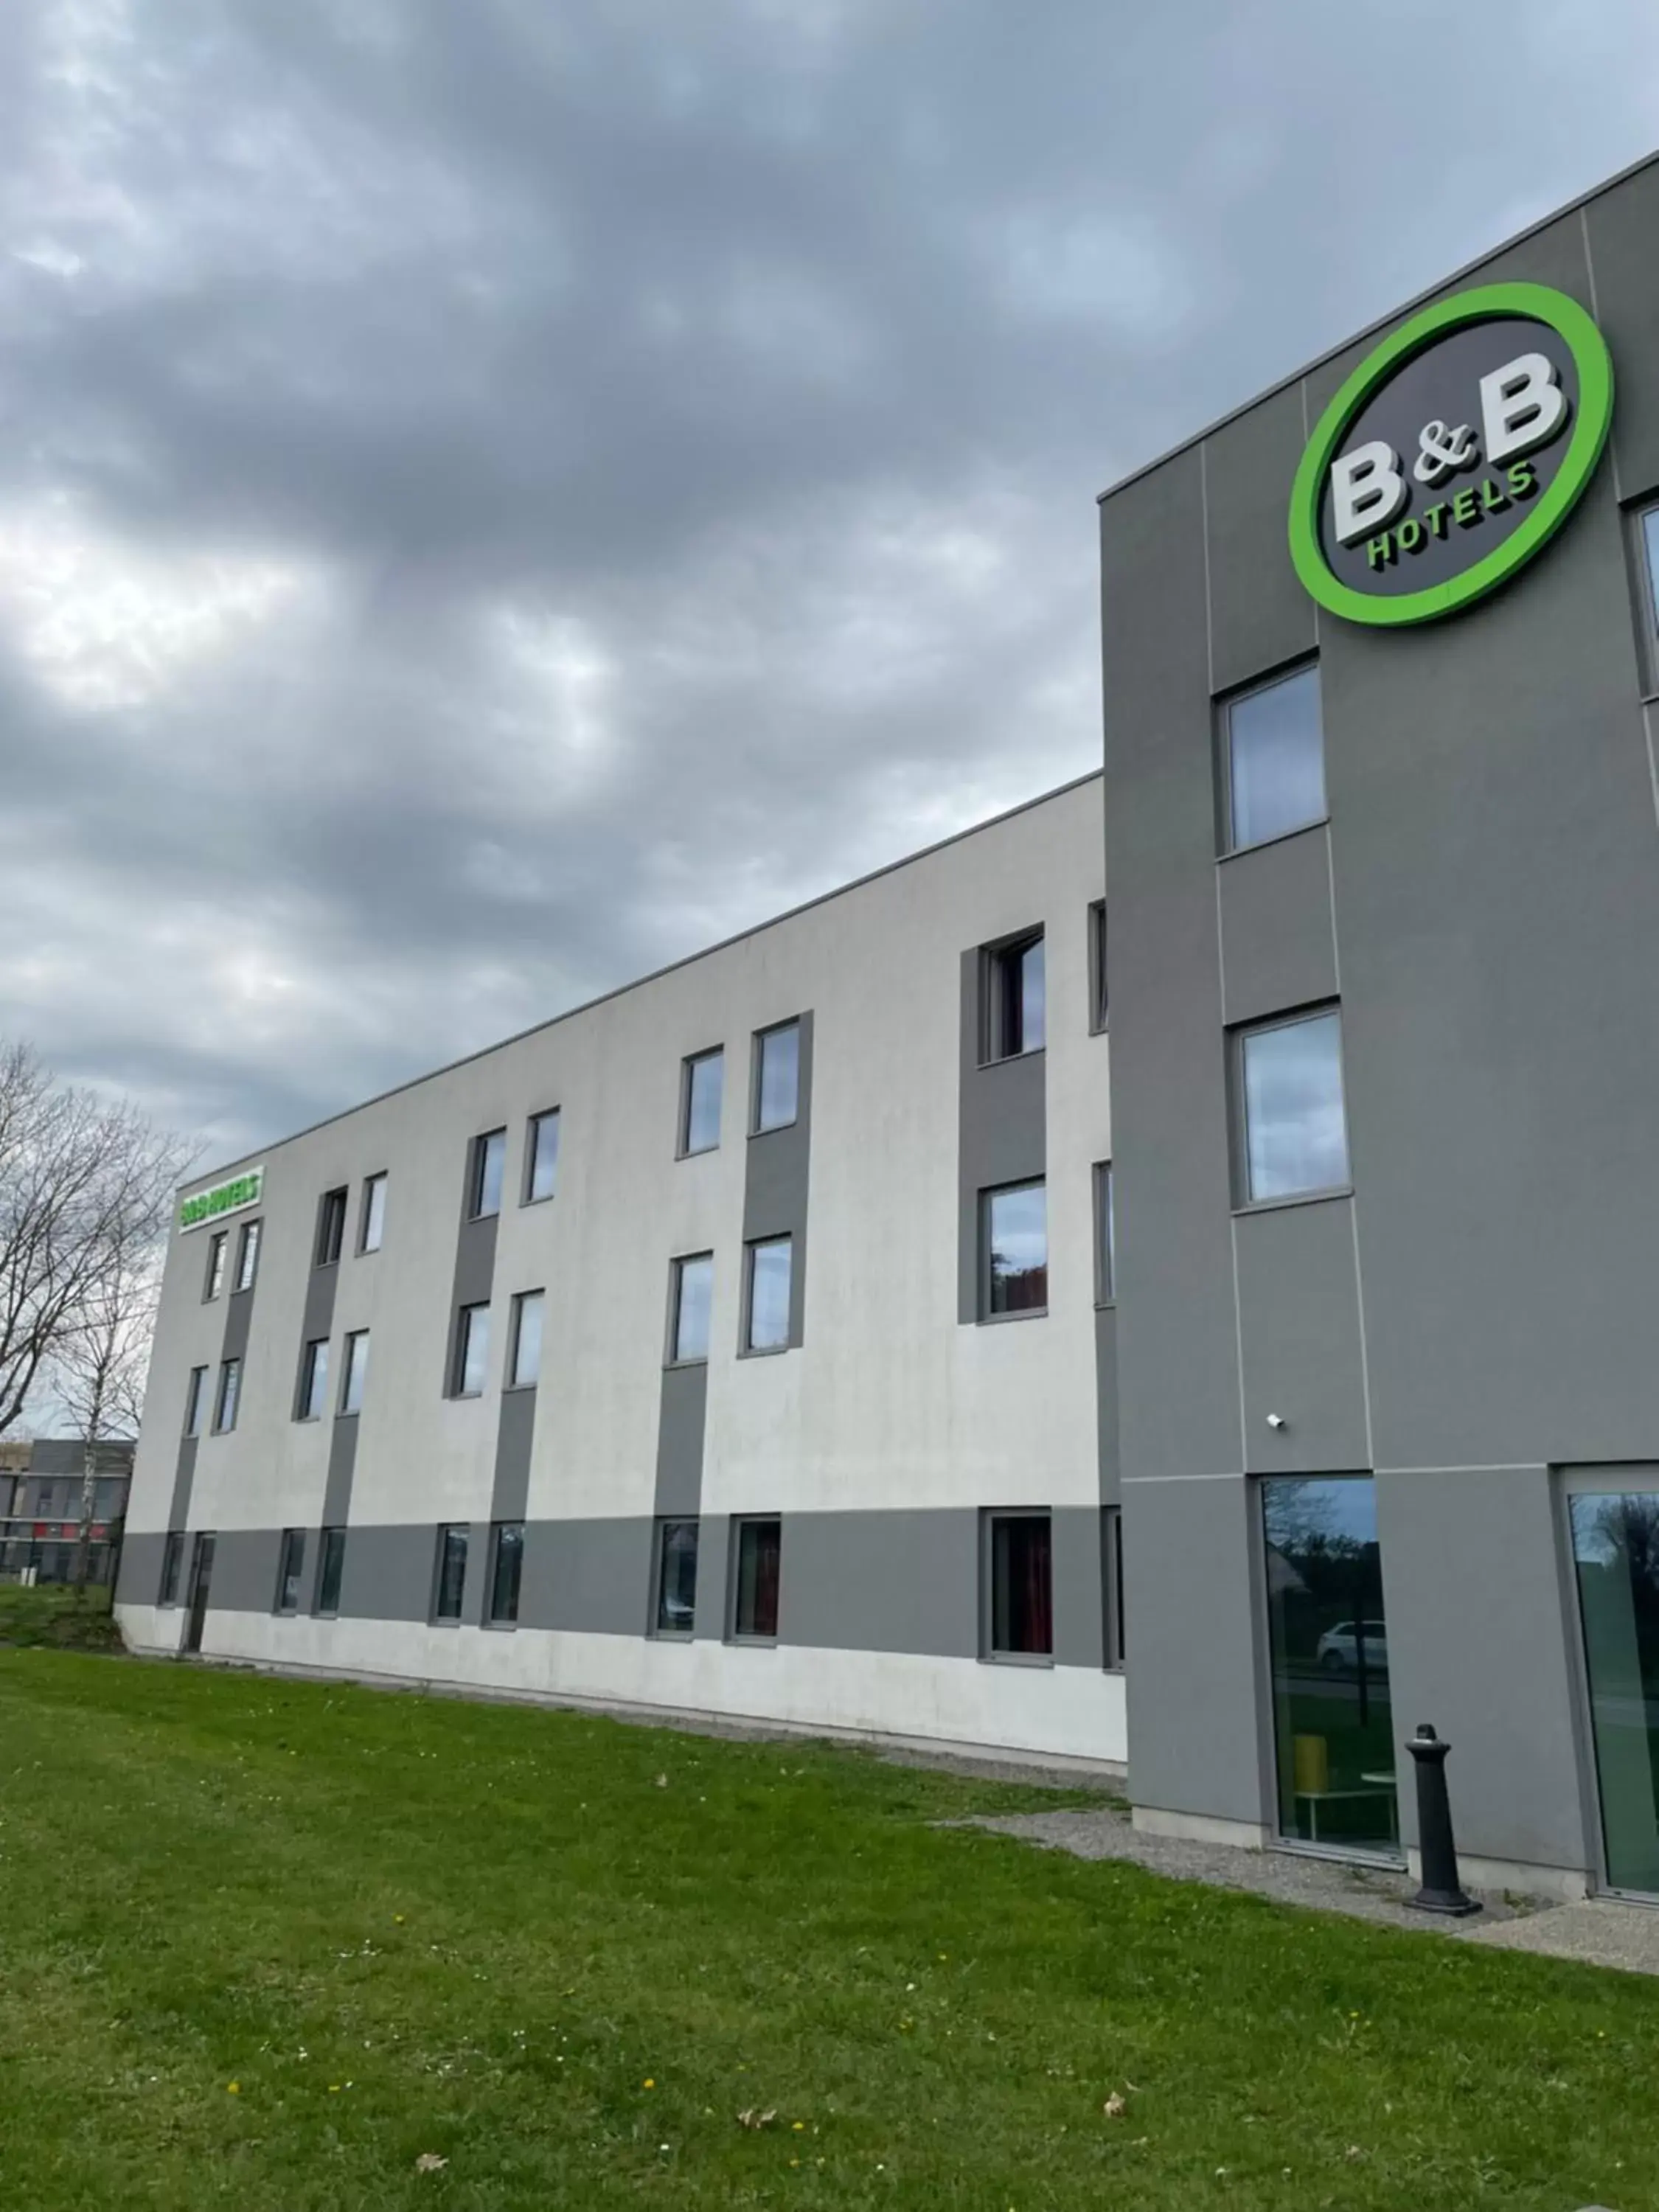 Property Building in B&B HOTEL Laval Ouest